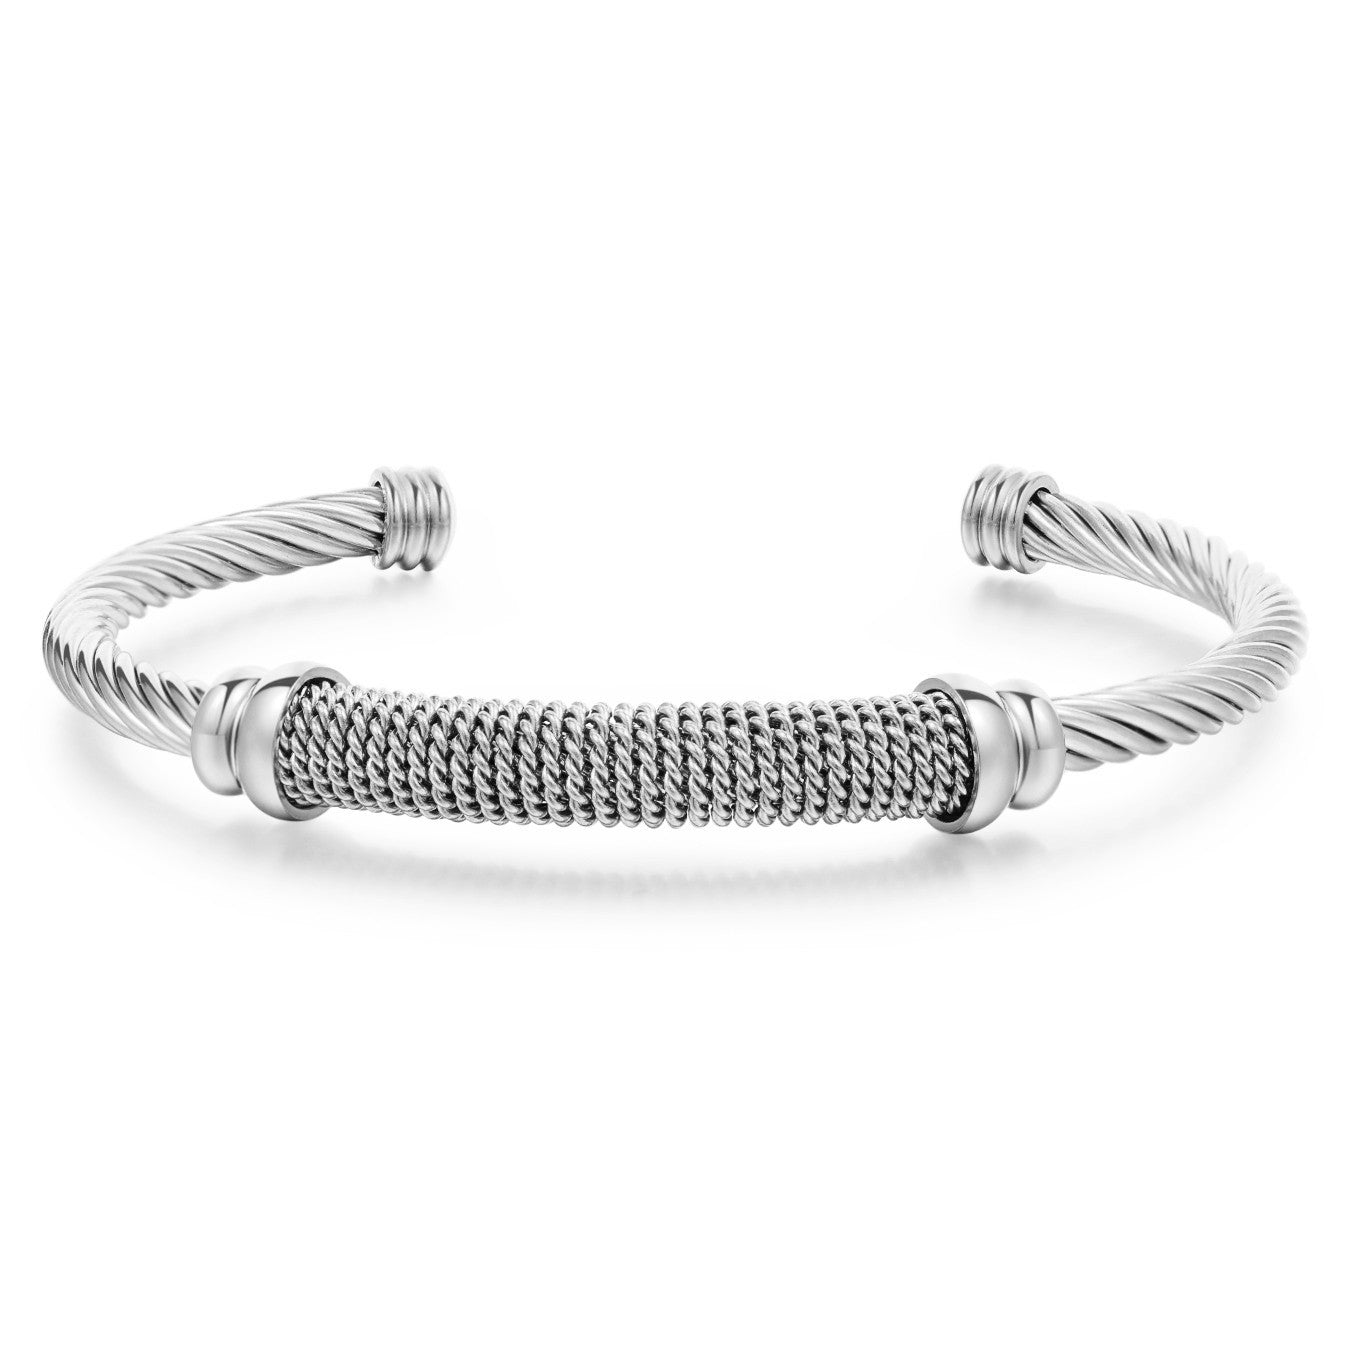 5pcs/lot Stainless Steel Rope Open Bangle for Women Silver-5pcs Women Bracelets Charms Beads Beyond